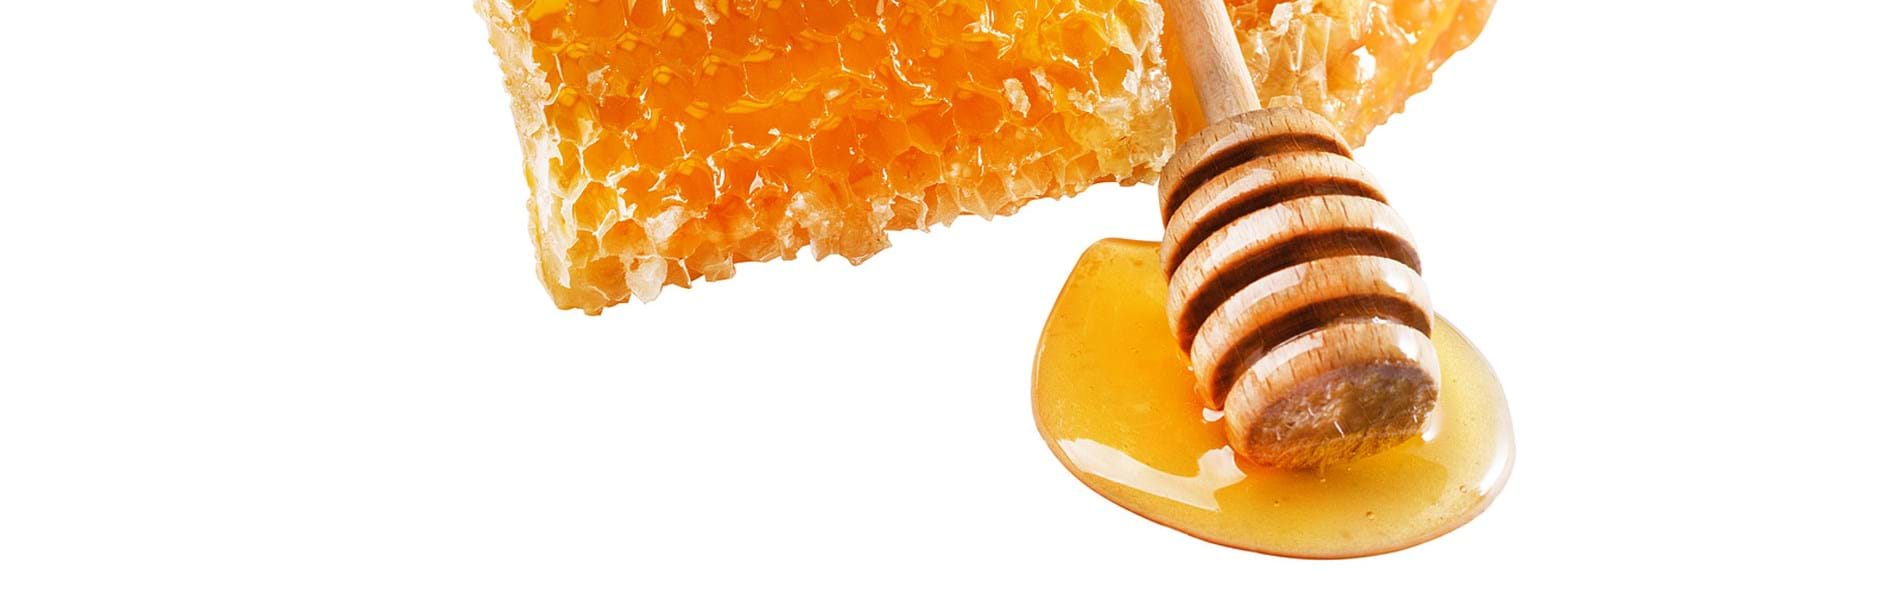 Automated Aroma and Flavour Profiling of Honey Using High-Capacity Sorptive Extraction